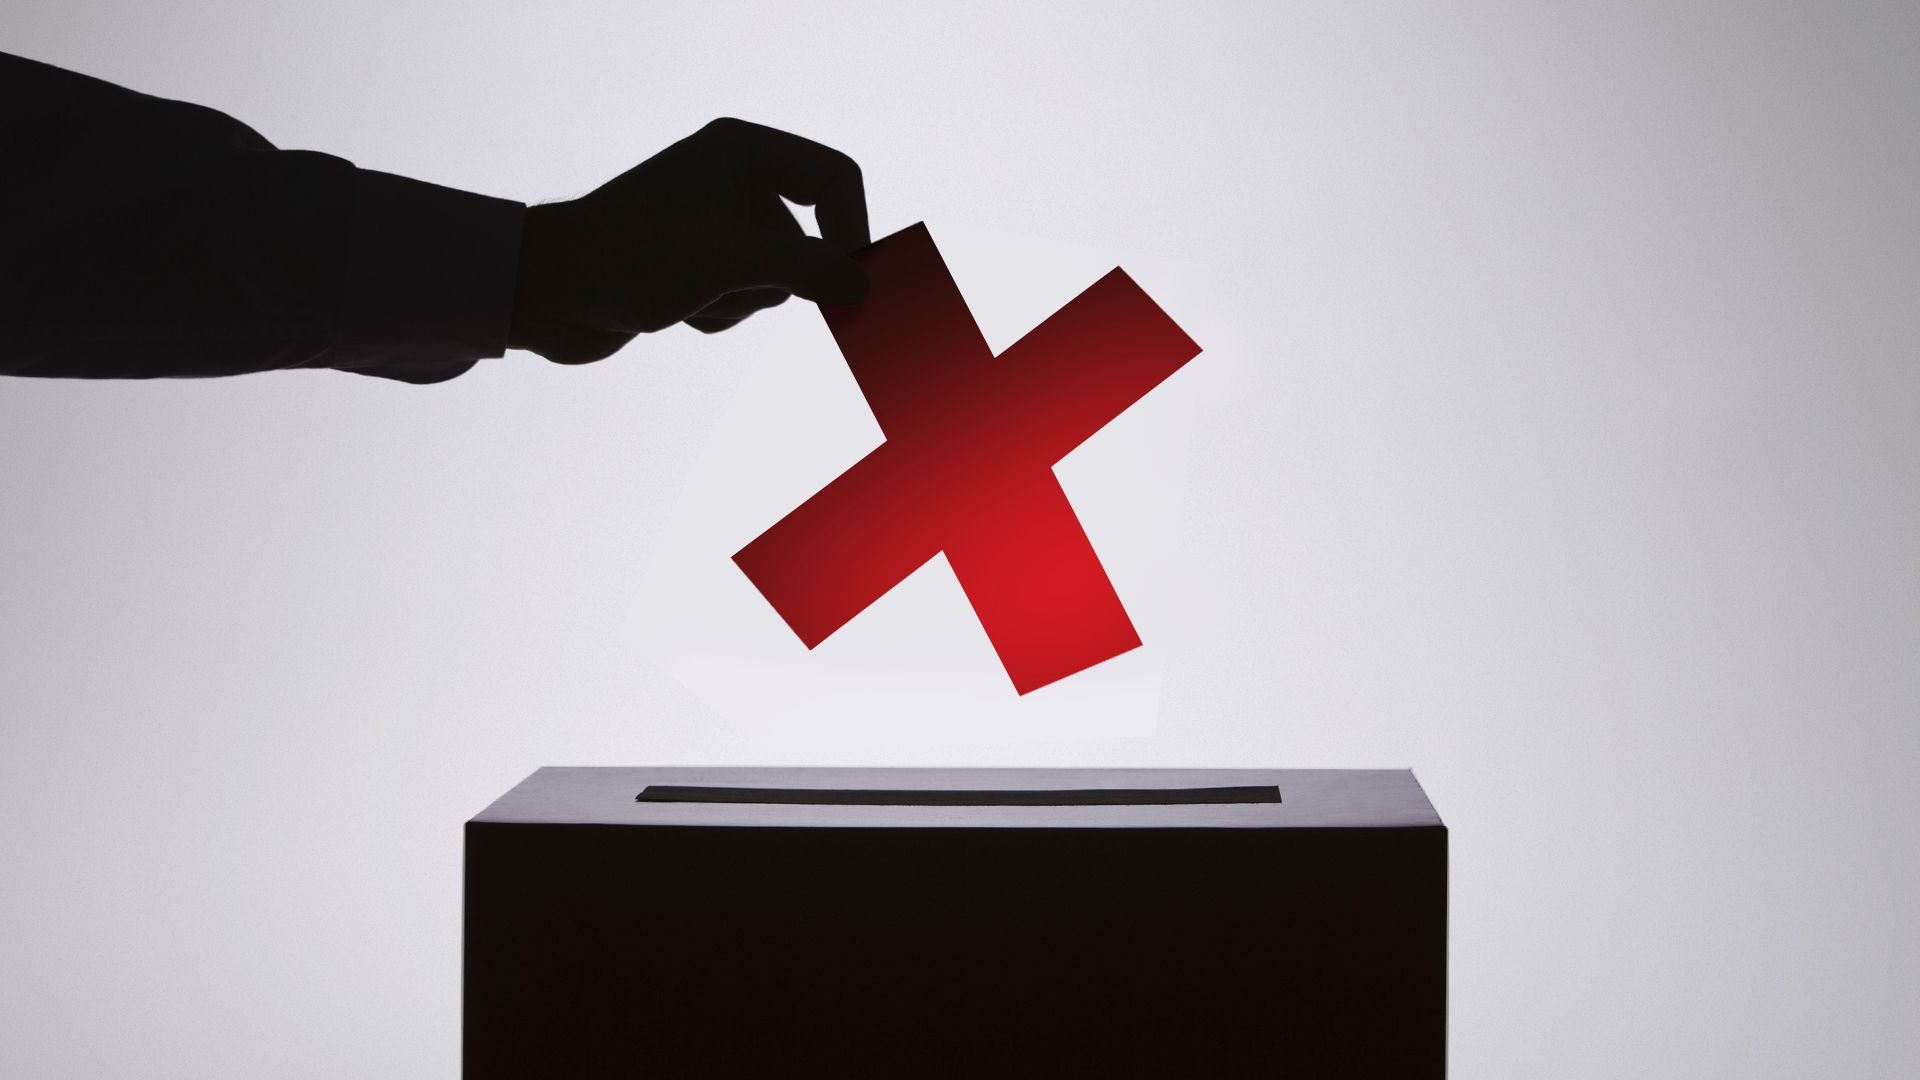 Illustration of a hand placing a red X into a ballot box.